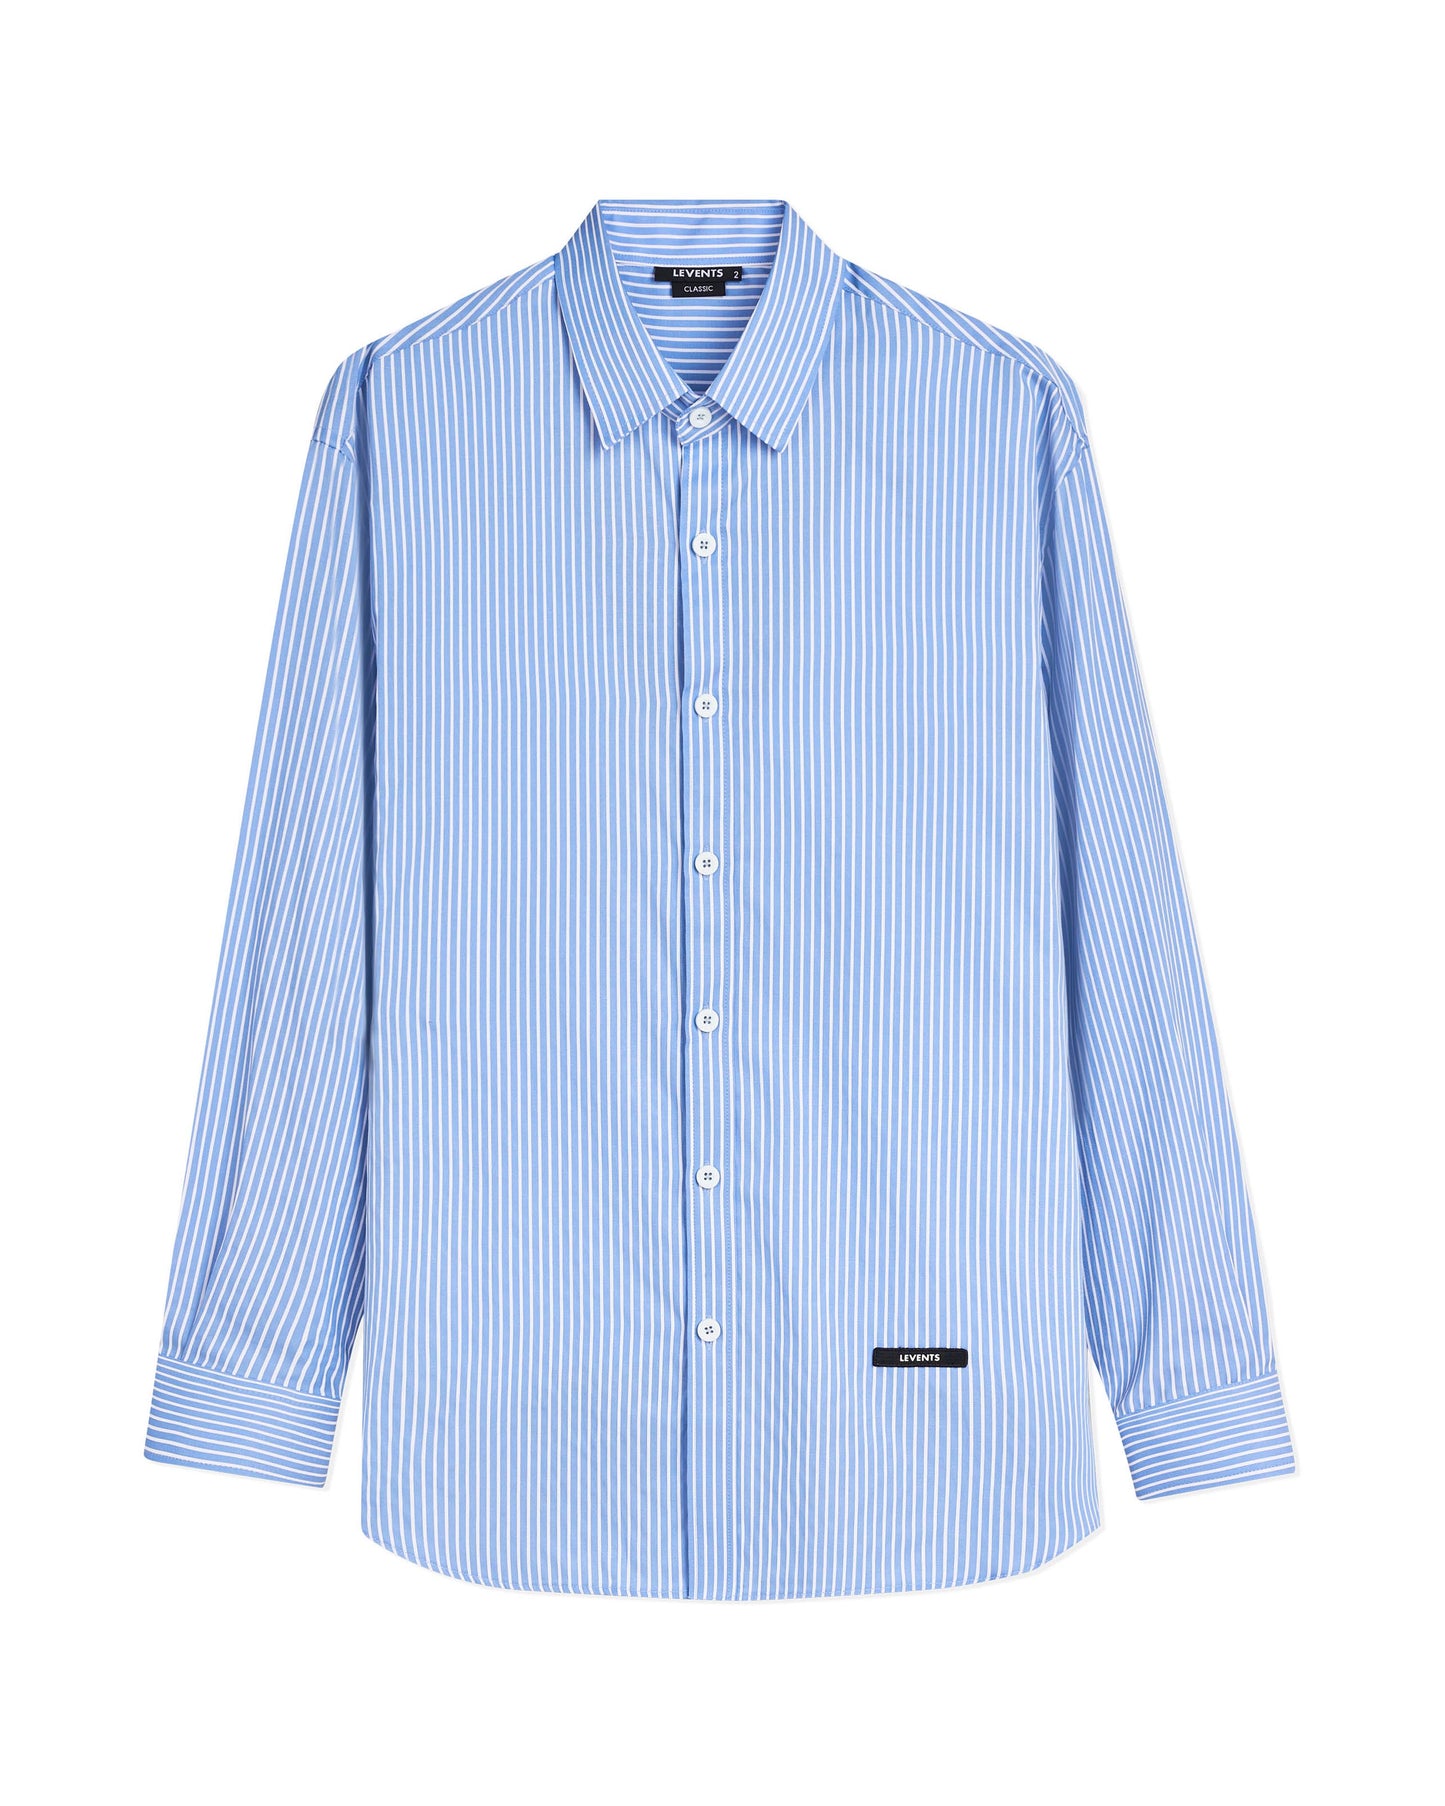 Levents® Classic Striped Long Sleeve Shirt/ Blue